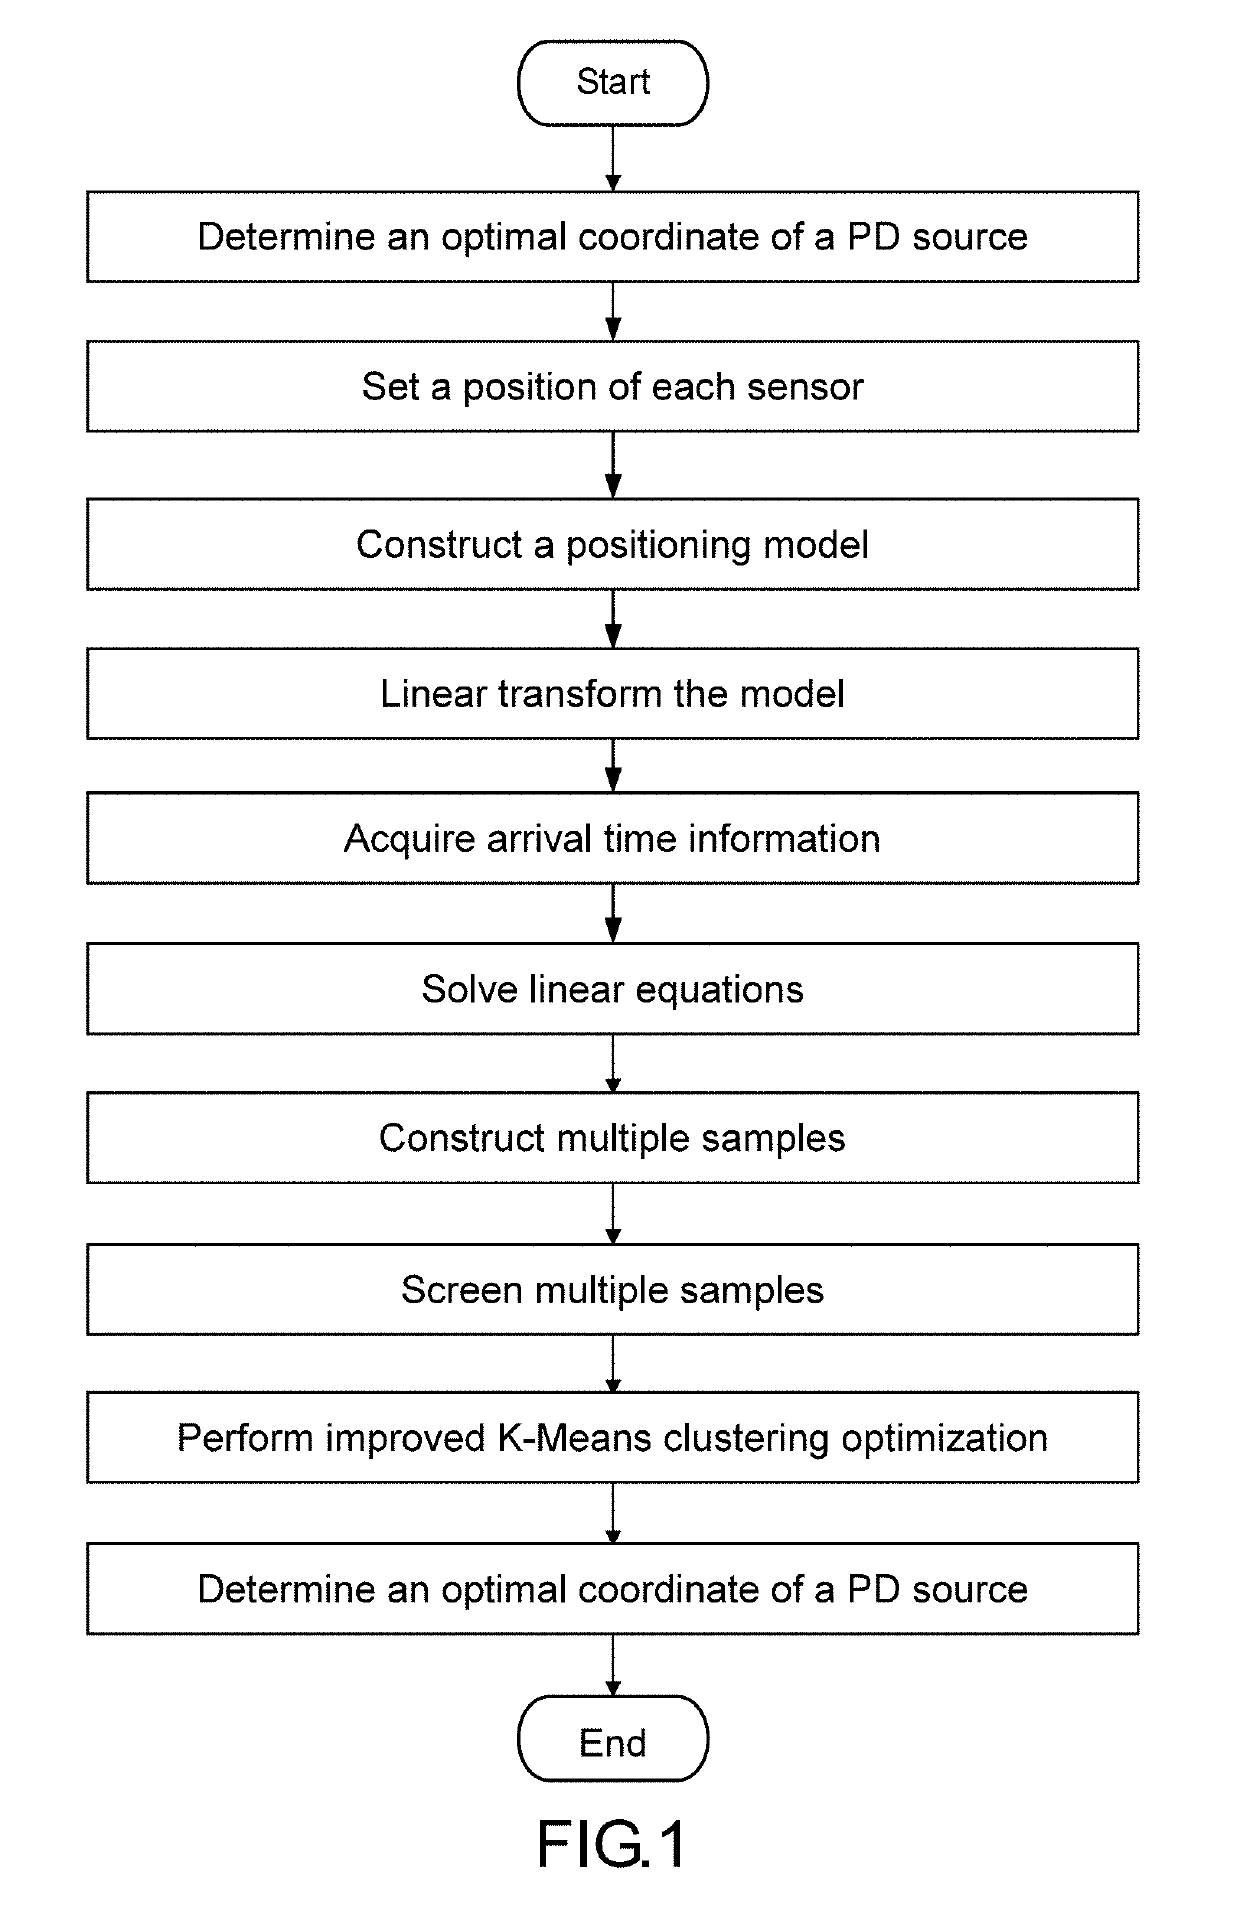 Nonlinear model transformation solving and optimization method for partial discharge positioning based on multi-ultrasonic sensor